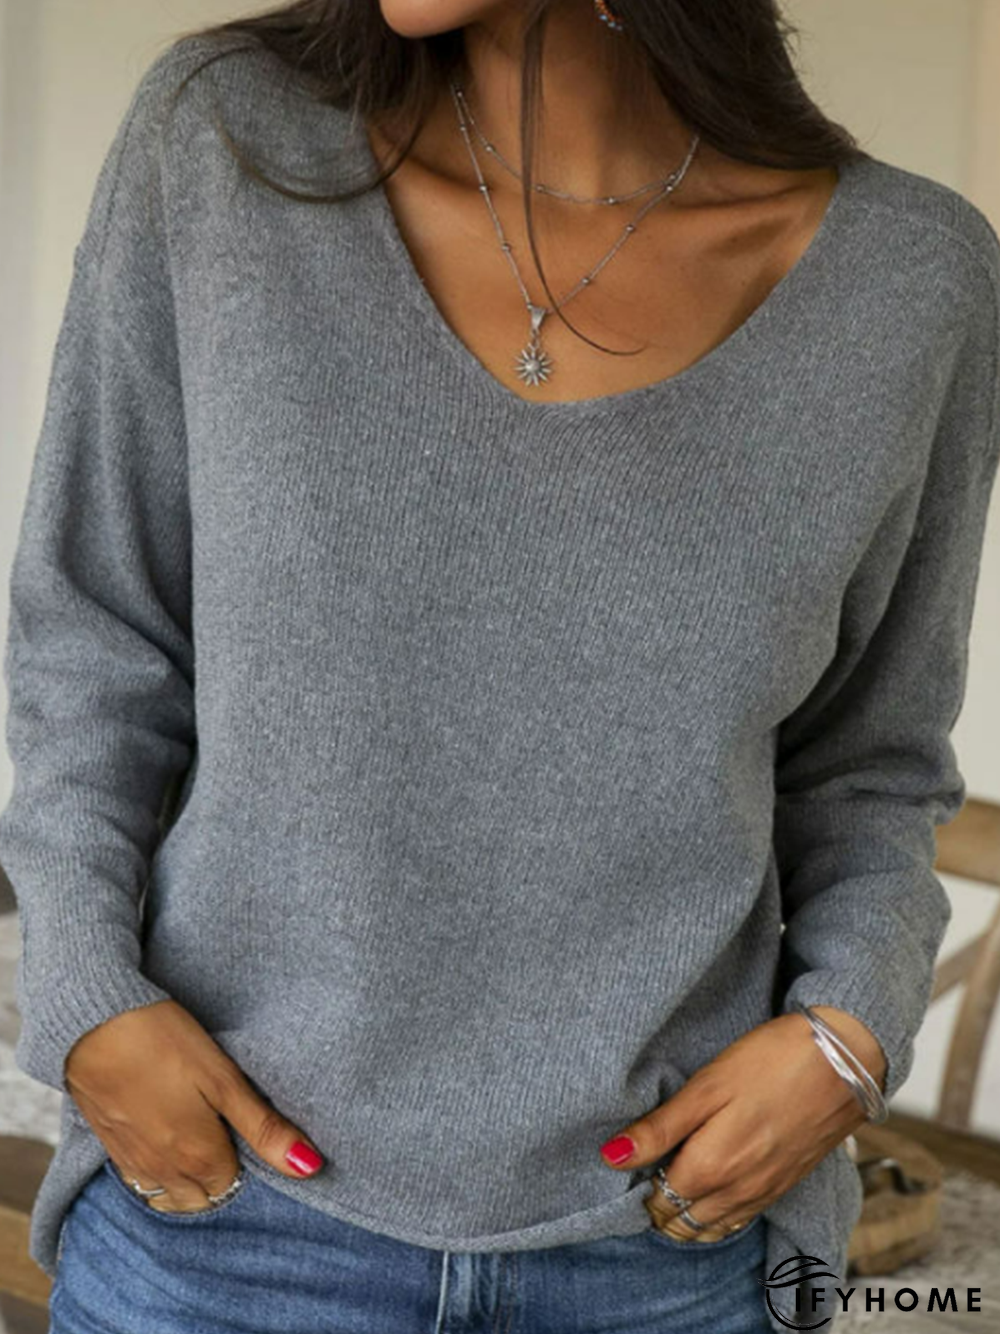 Long sleeve V-neck plain patterned basic stretch sweater for warmth | IFYHOME